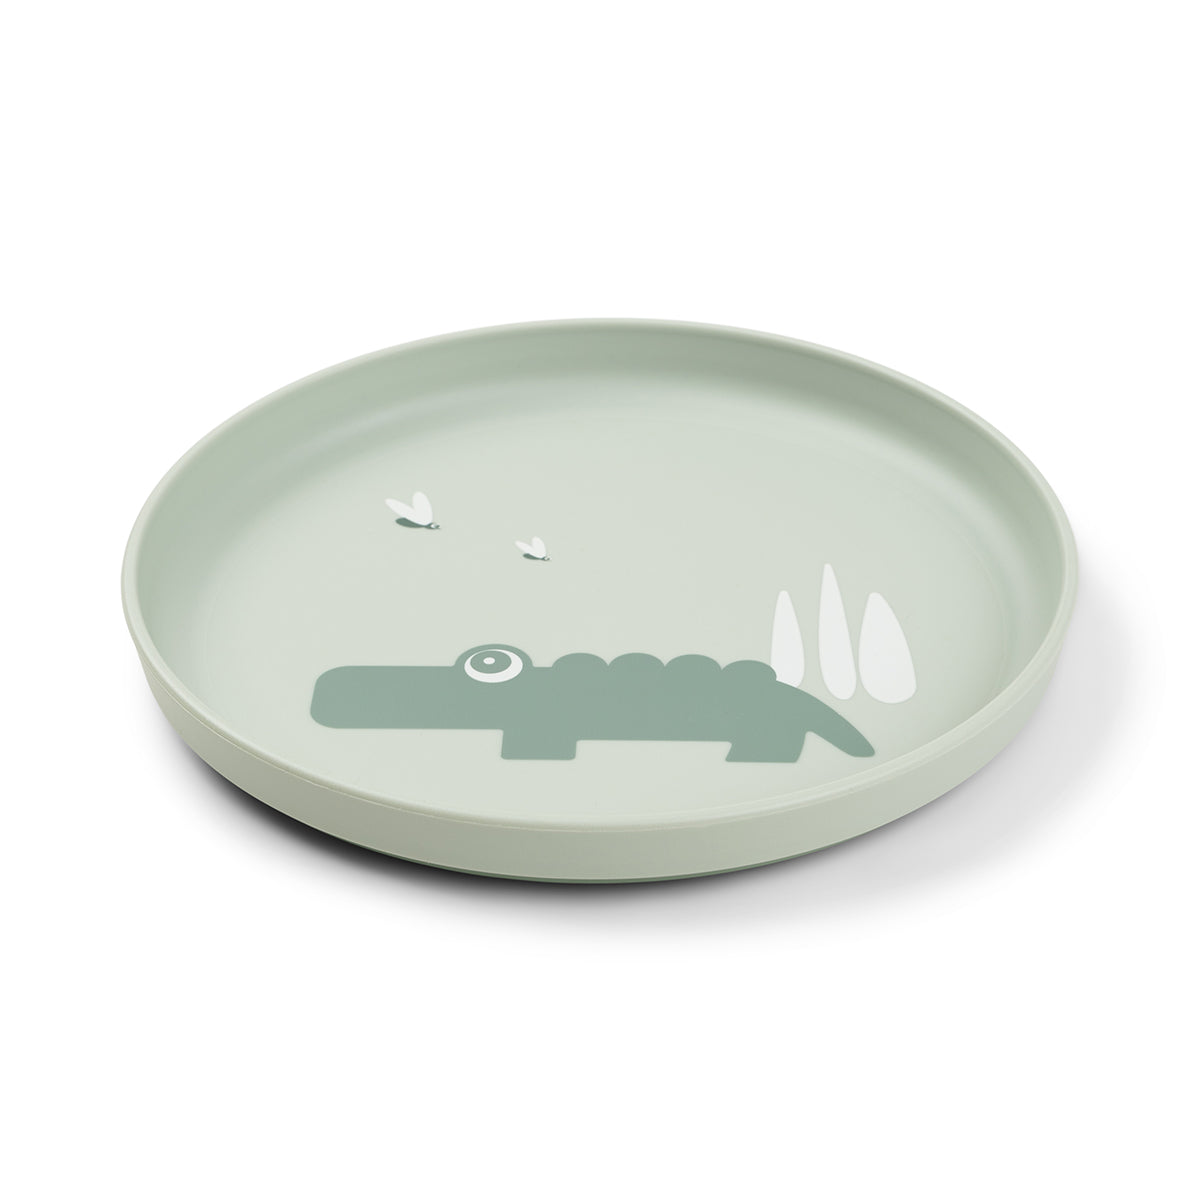 Assiette enfant ventouse antidérapante en silicone wally bleu DONE BY DEER  - Ambiance & Styles